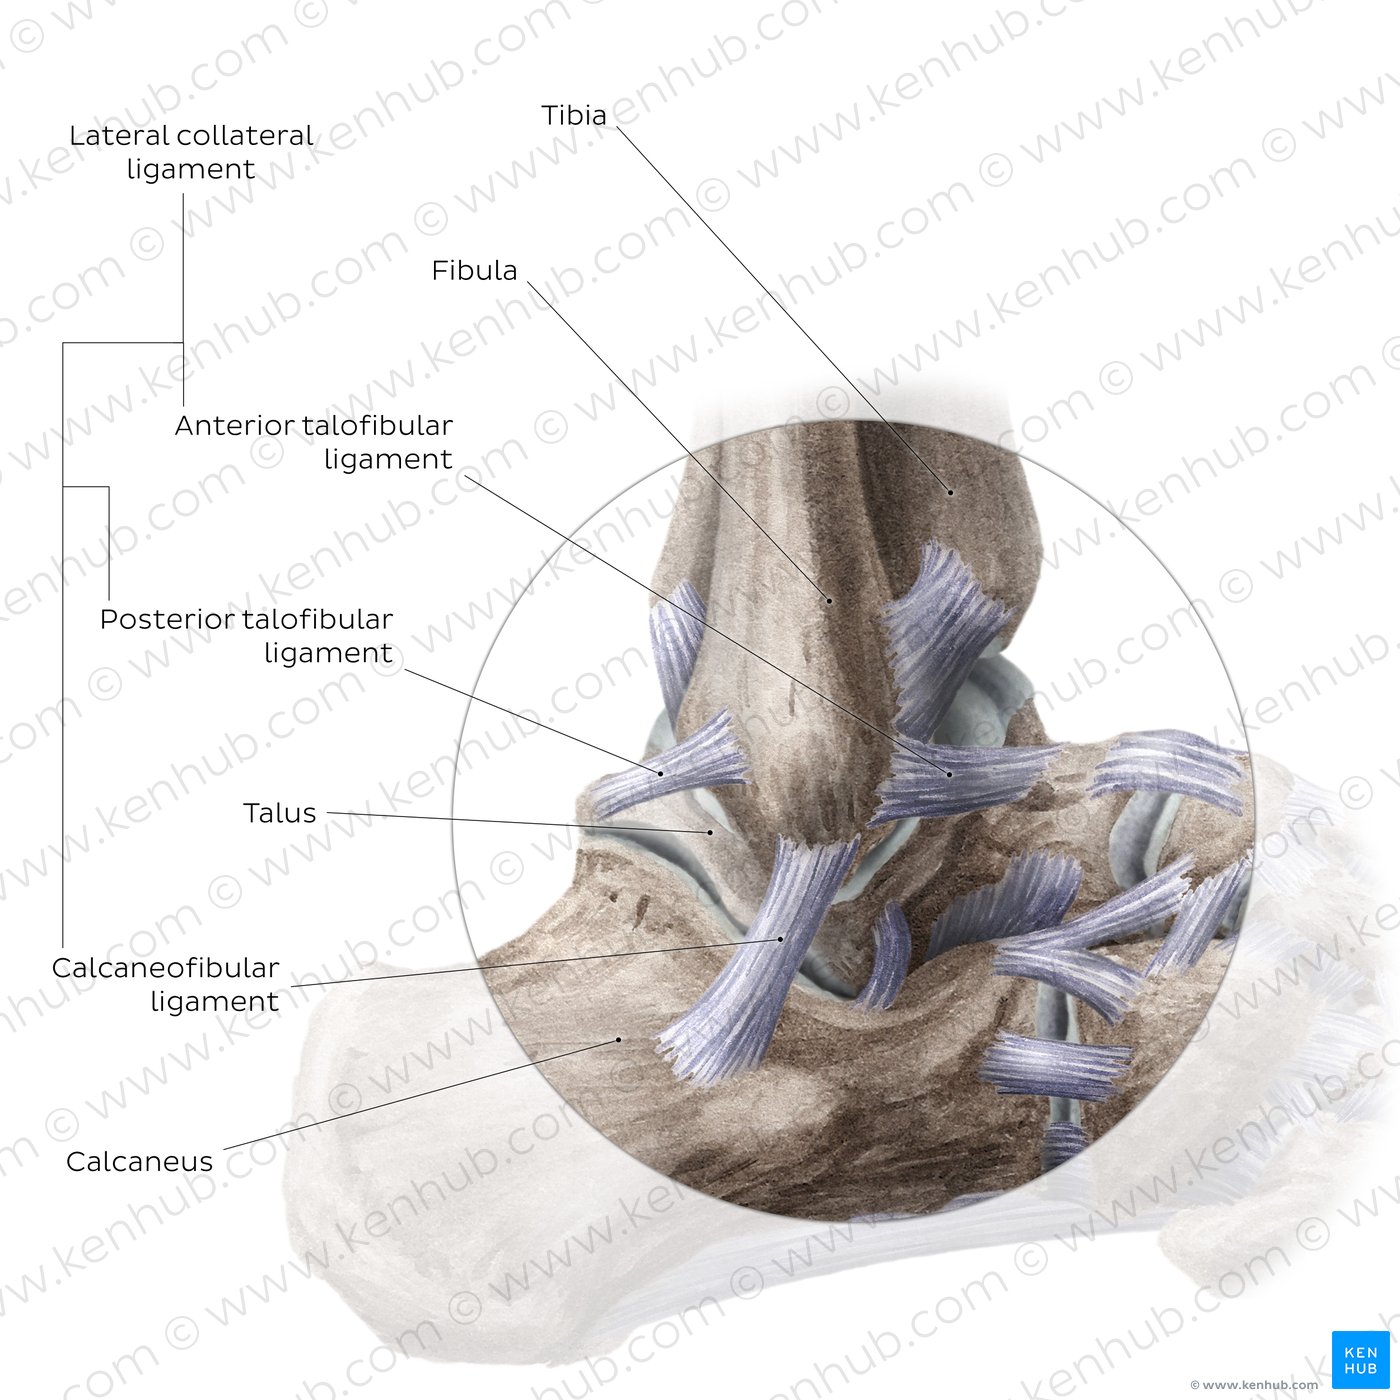 Anatomy of the ankle joint: Lateral view